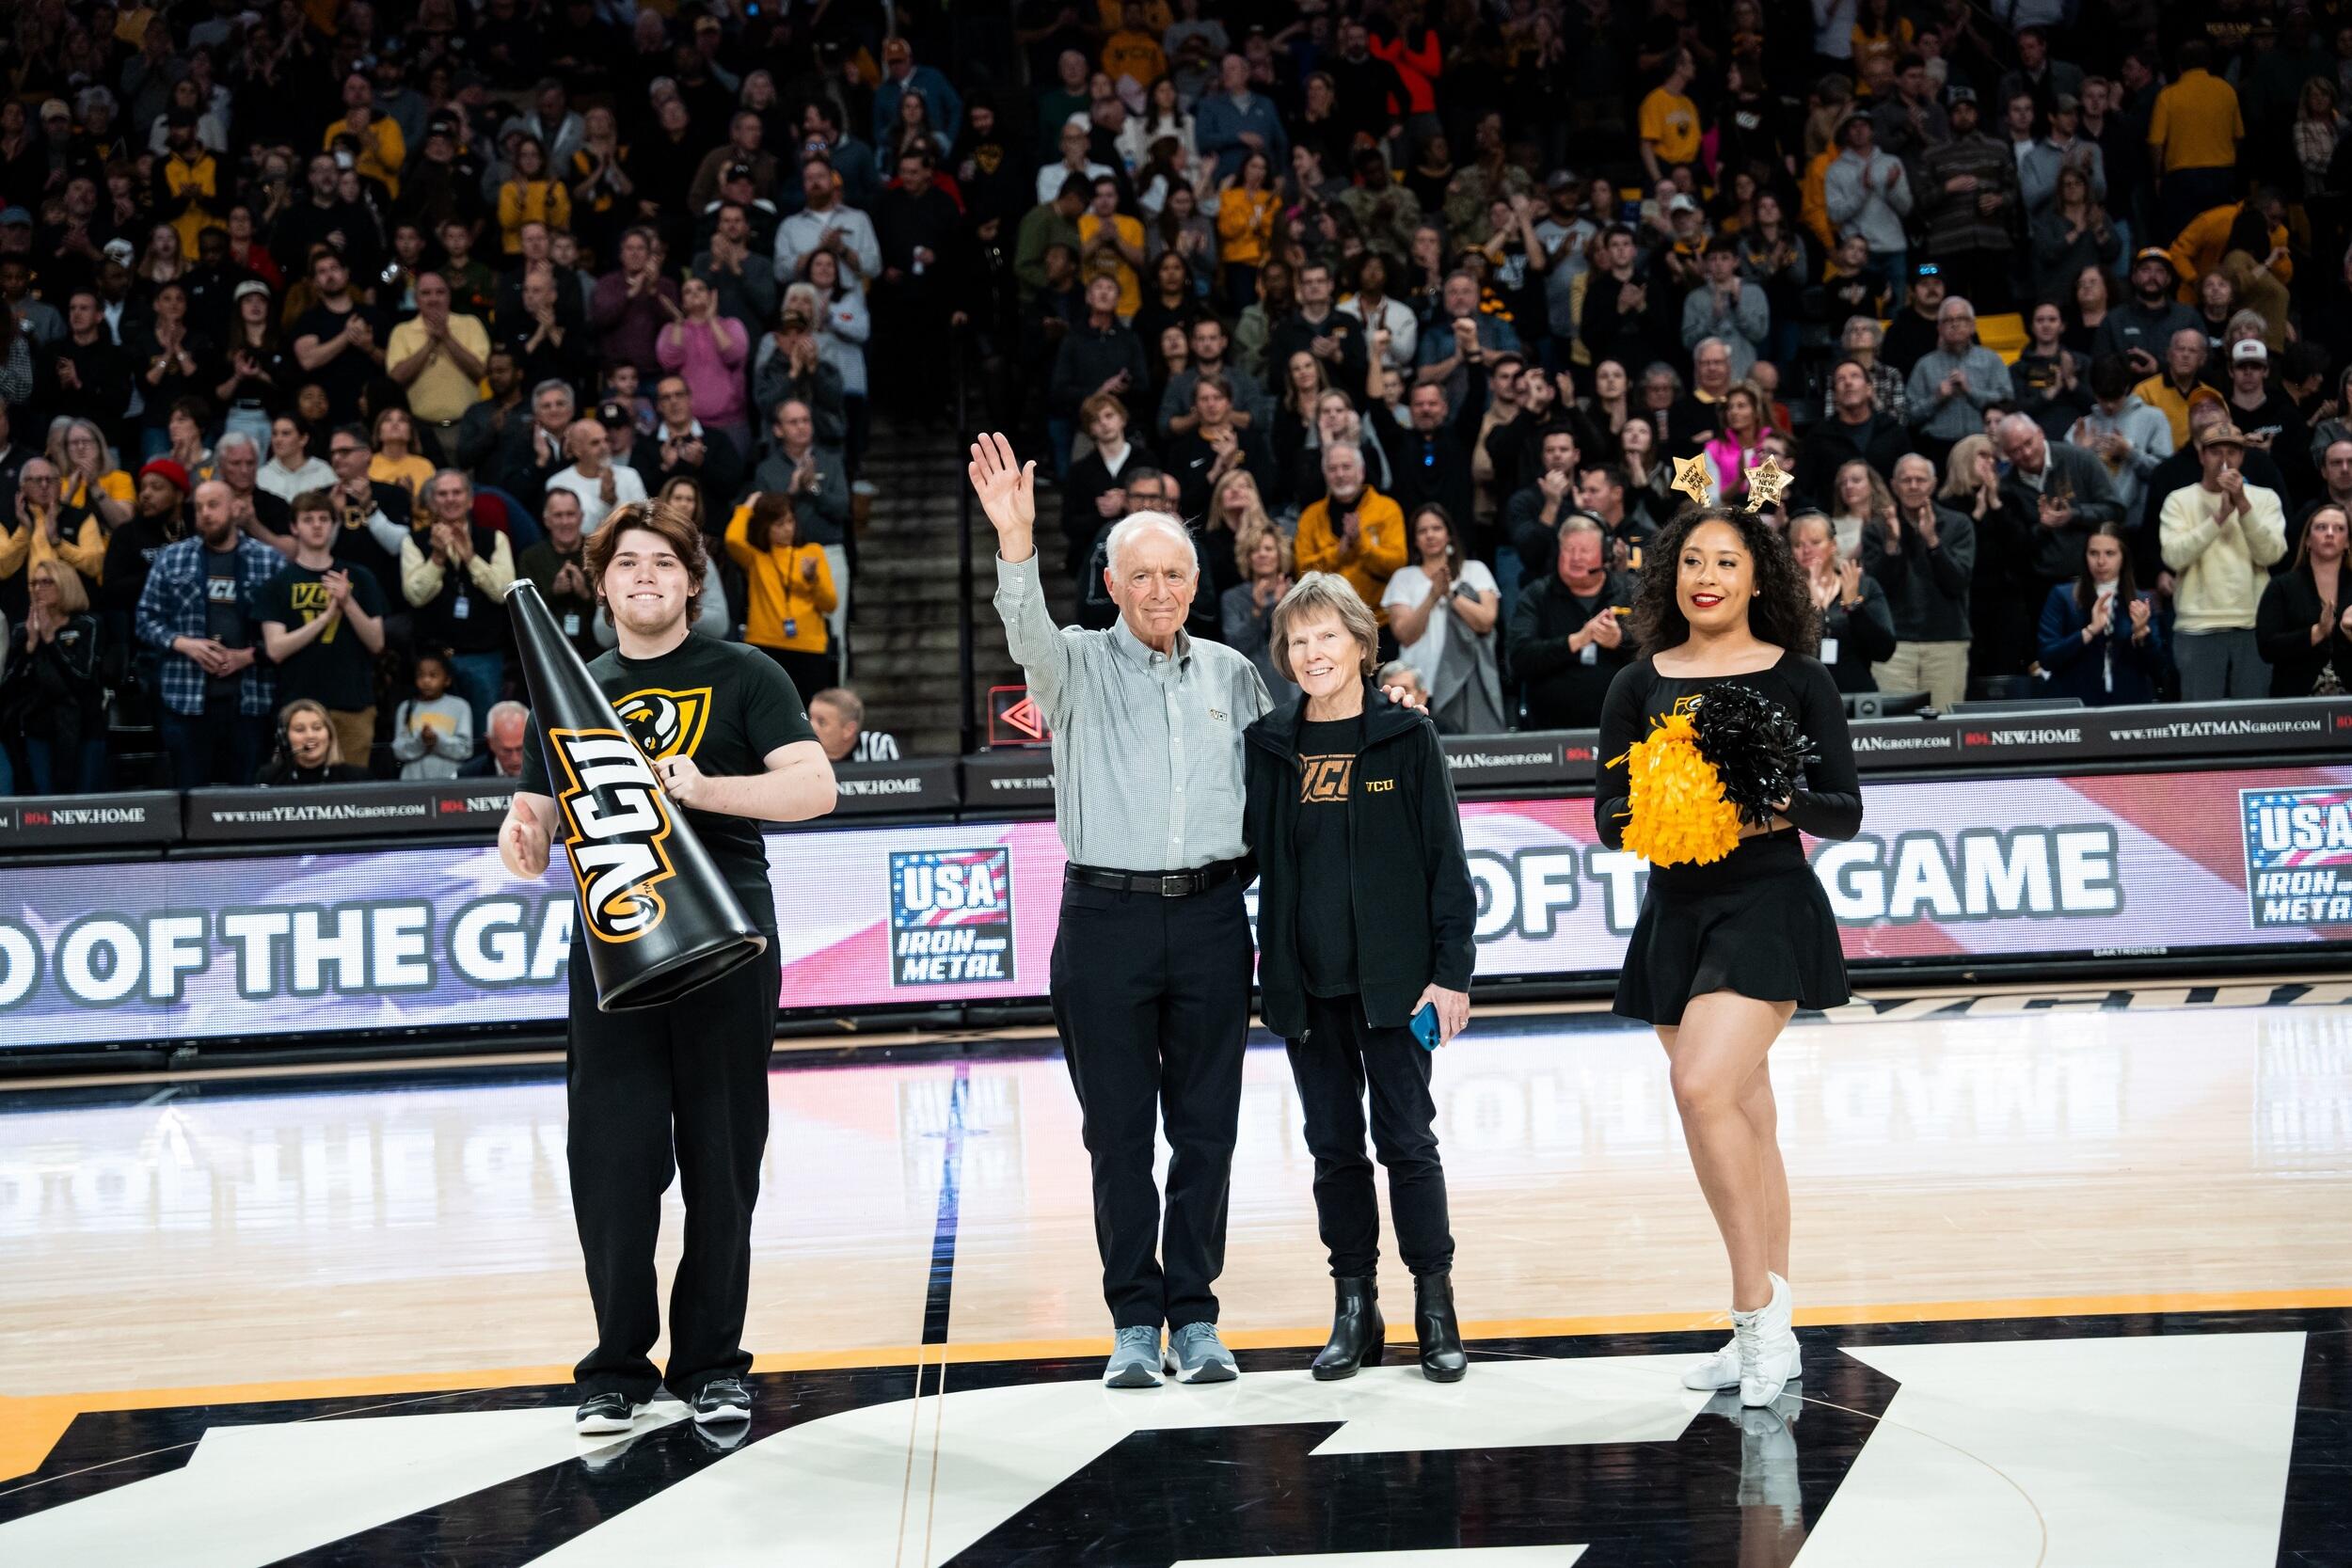 A photo of a man standing to the left of a woman with the arm closest to her behind her back and the other stretched up in the air waving. To the man's left is a another man holding a triangle flag that says \"VCU\" and to the woman's right is a another woman holding pompoms. Behind them, the stadium's seats are filled with people watching. 